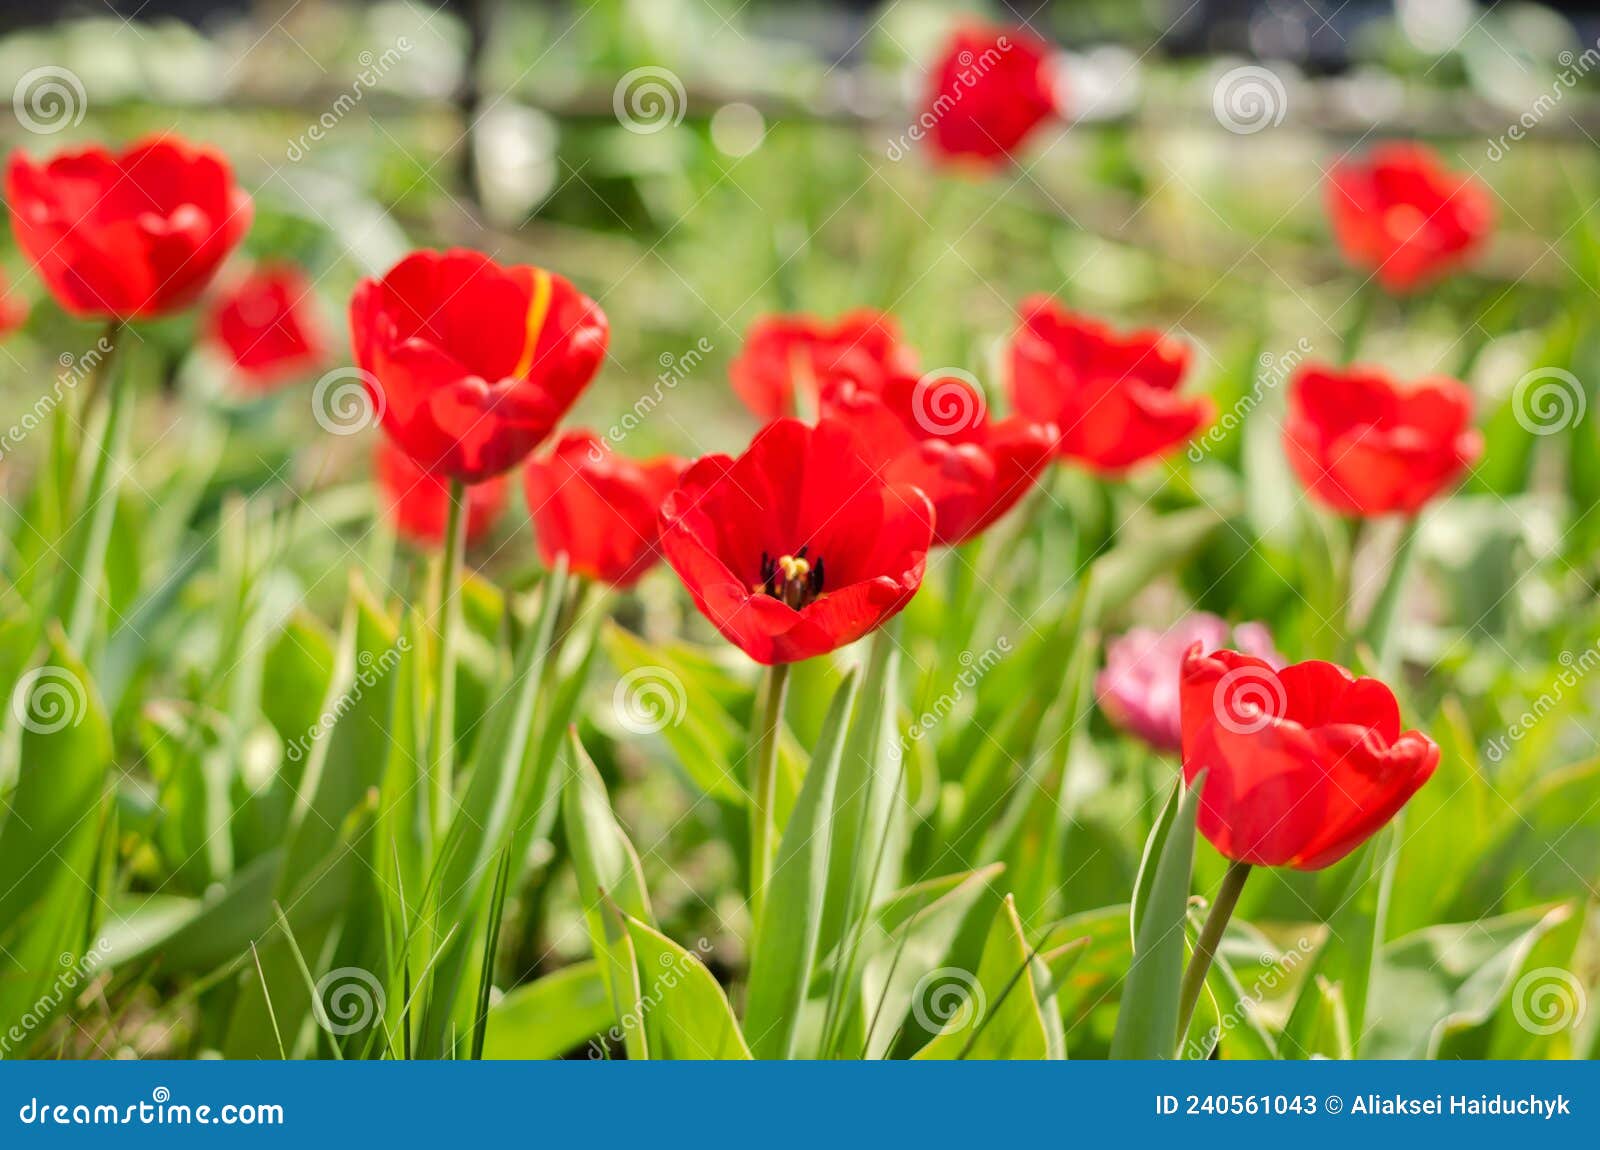 Abundance of Red Tulips in the Meadow Stock Image - Image of flowers ...